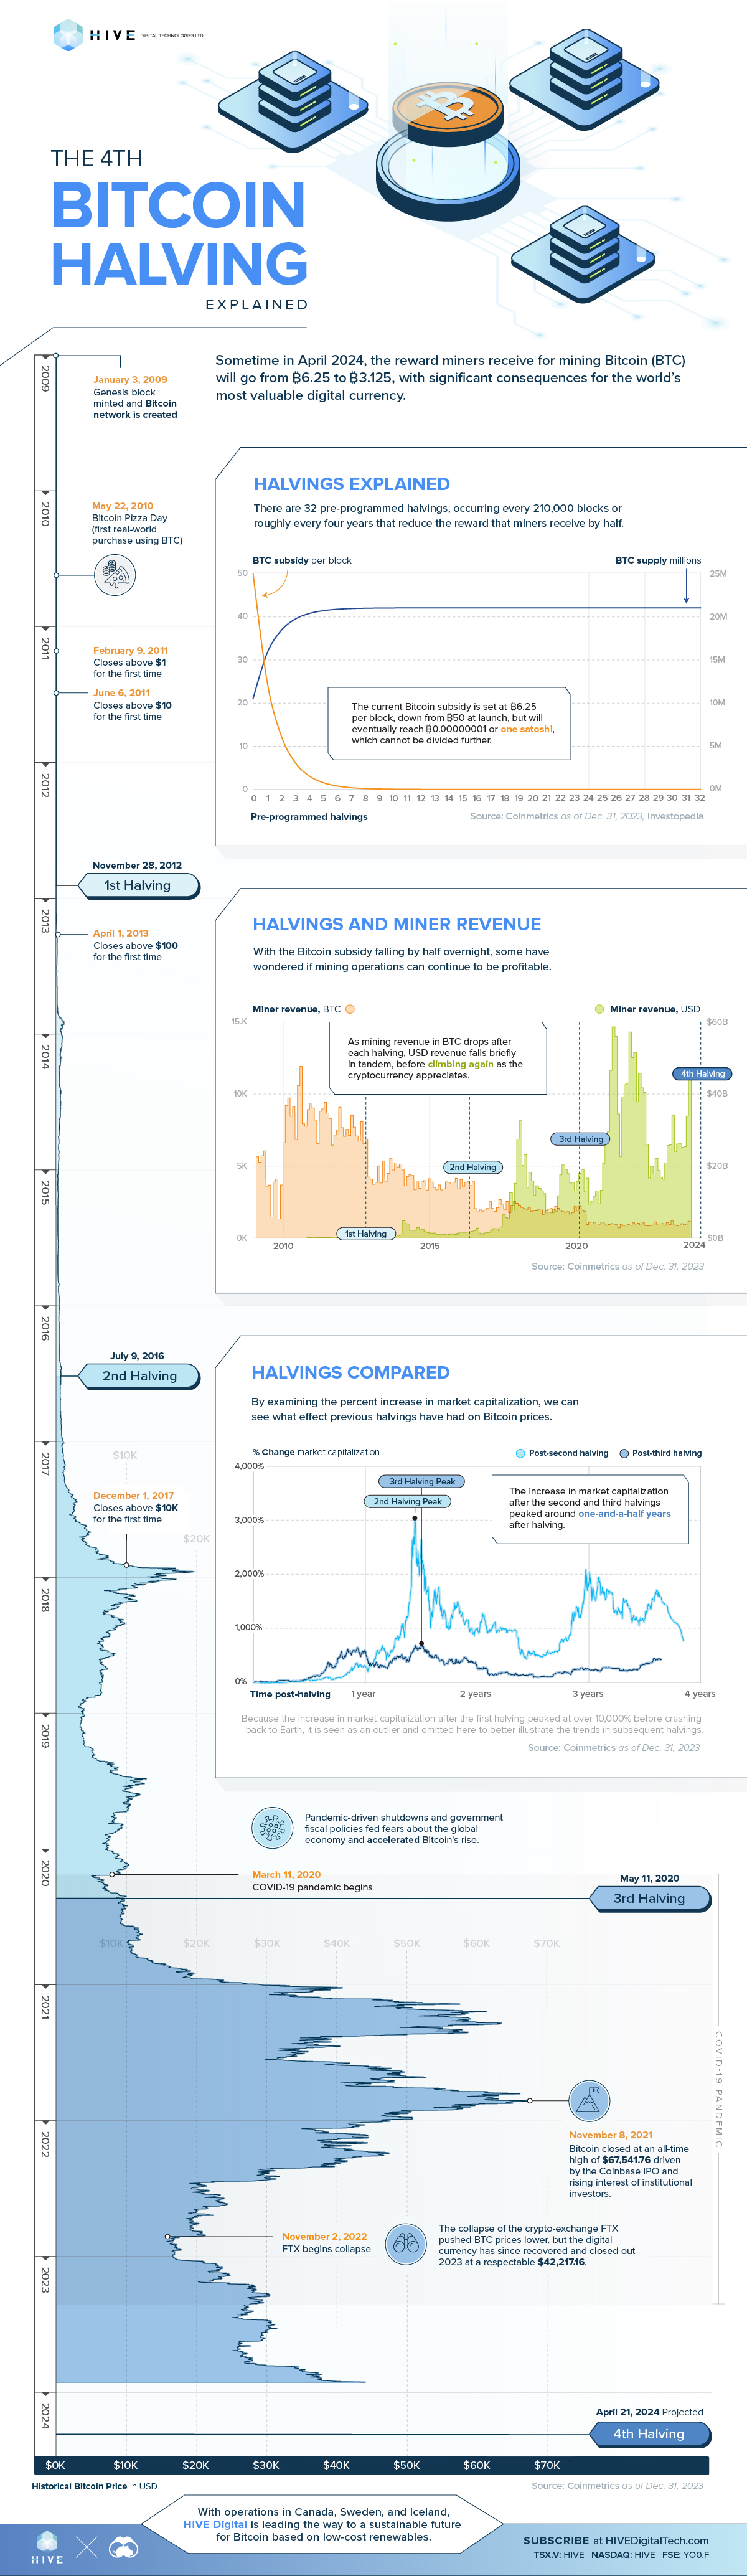 Area graph showing the historical price of Bitcoin in USD, and three line graphs comparing previous halvings, explaining the upcoming 4th halving.